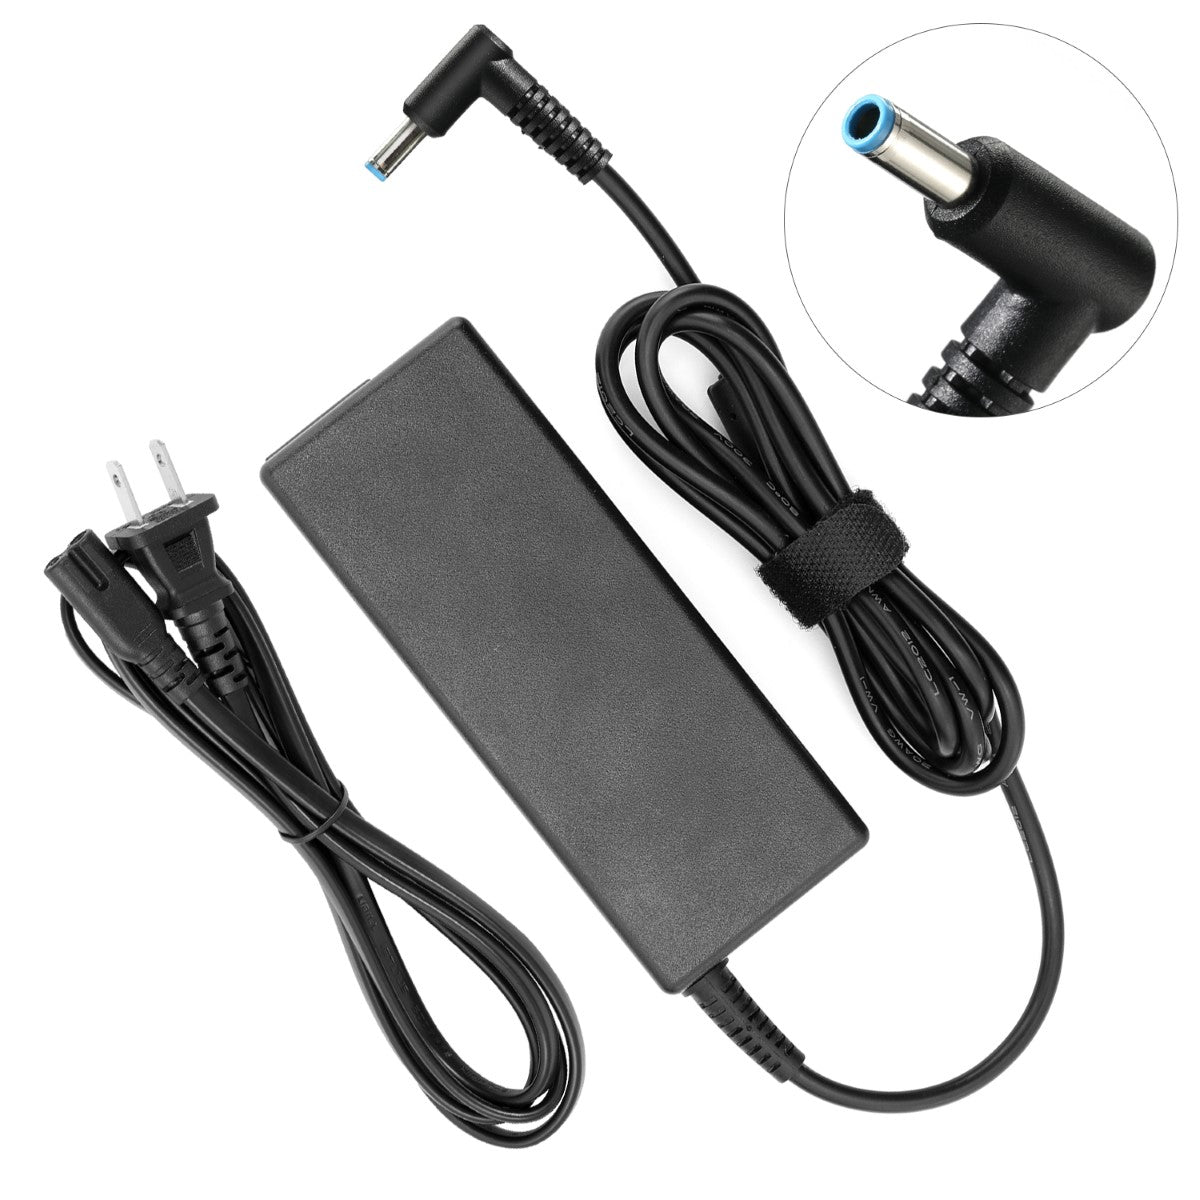 AC Adapter Charger for HP Envy x360 Series Notebook.